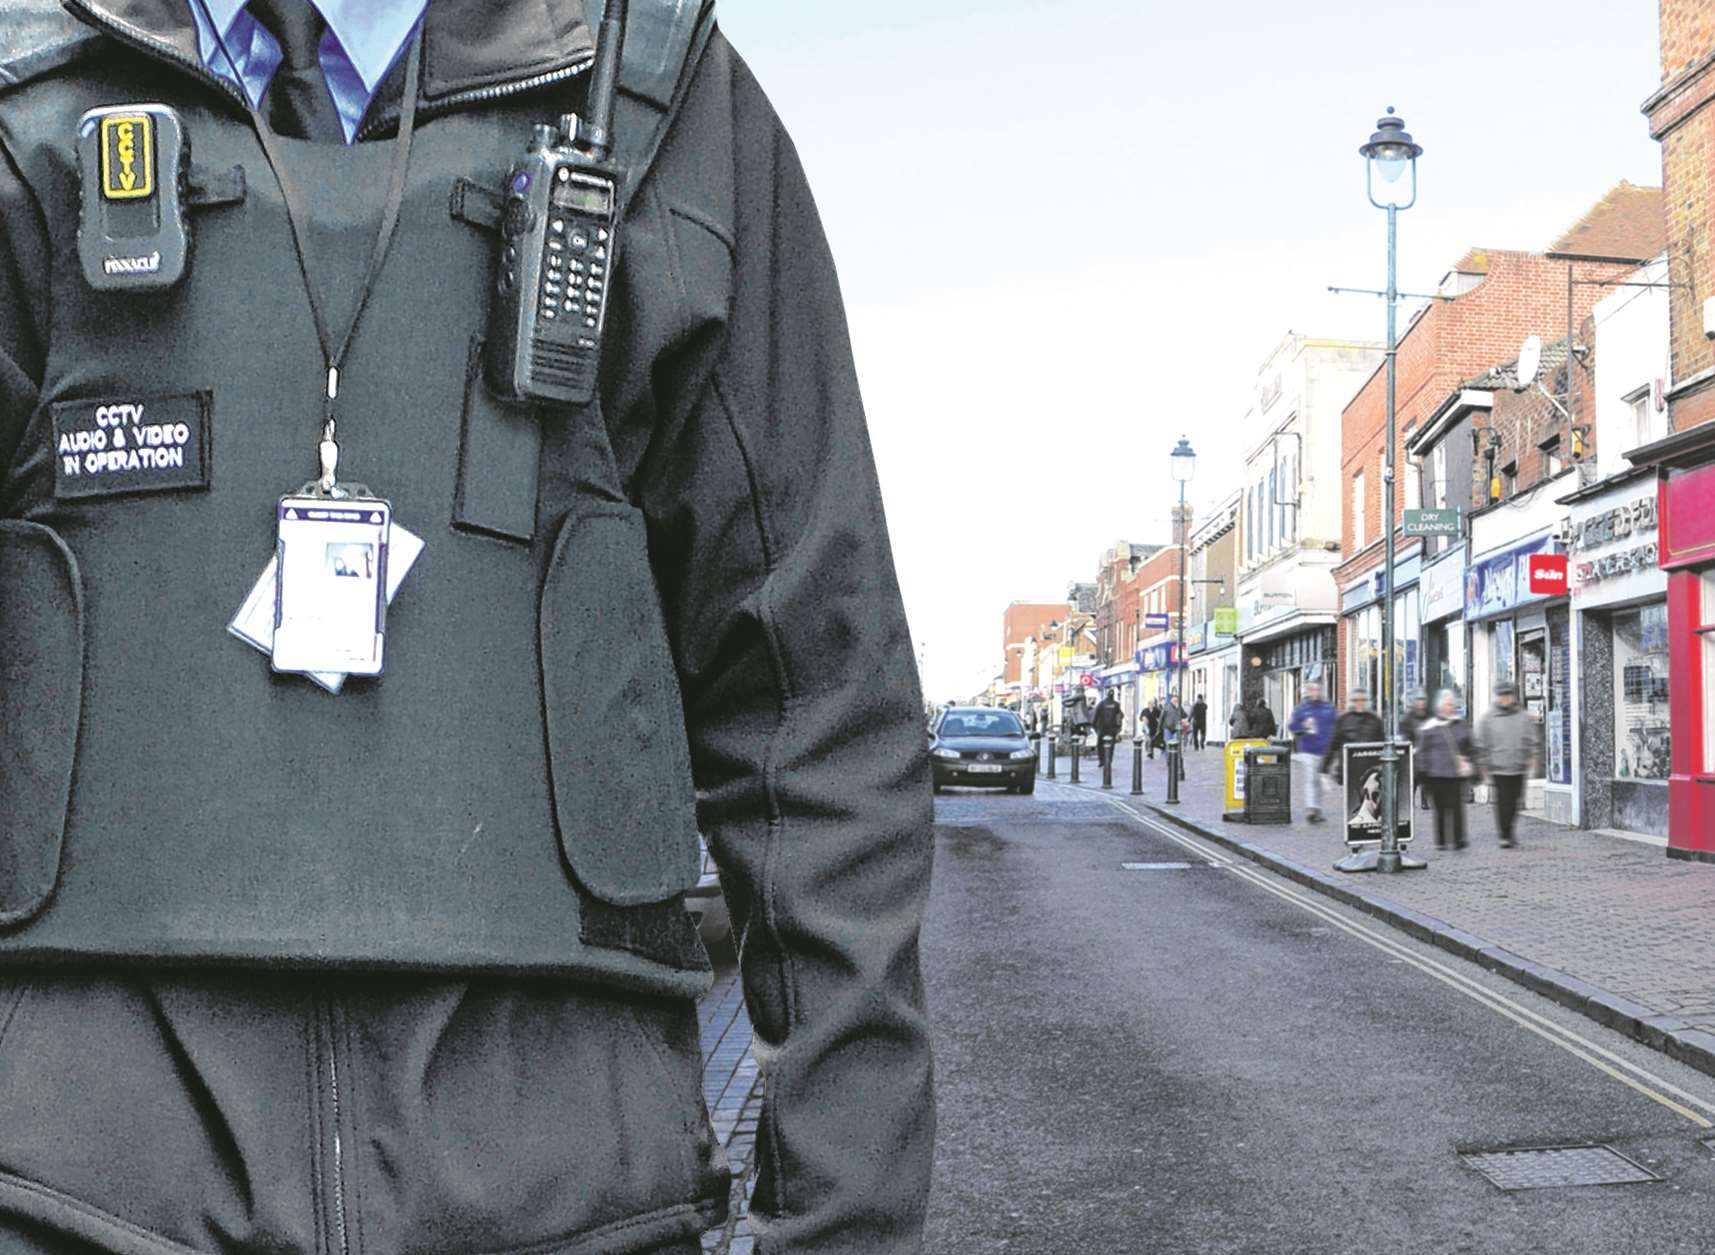 Enforcement officers have doled out a number of on the spot fines